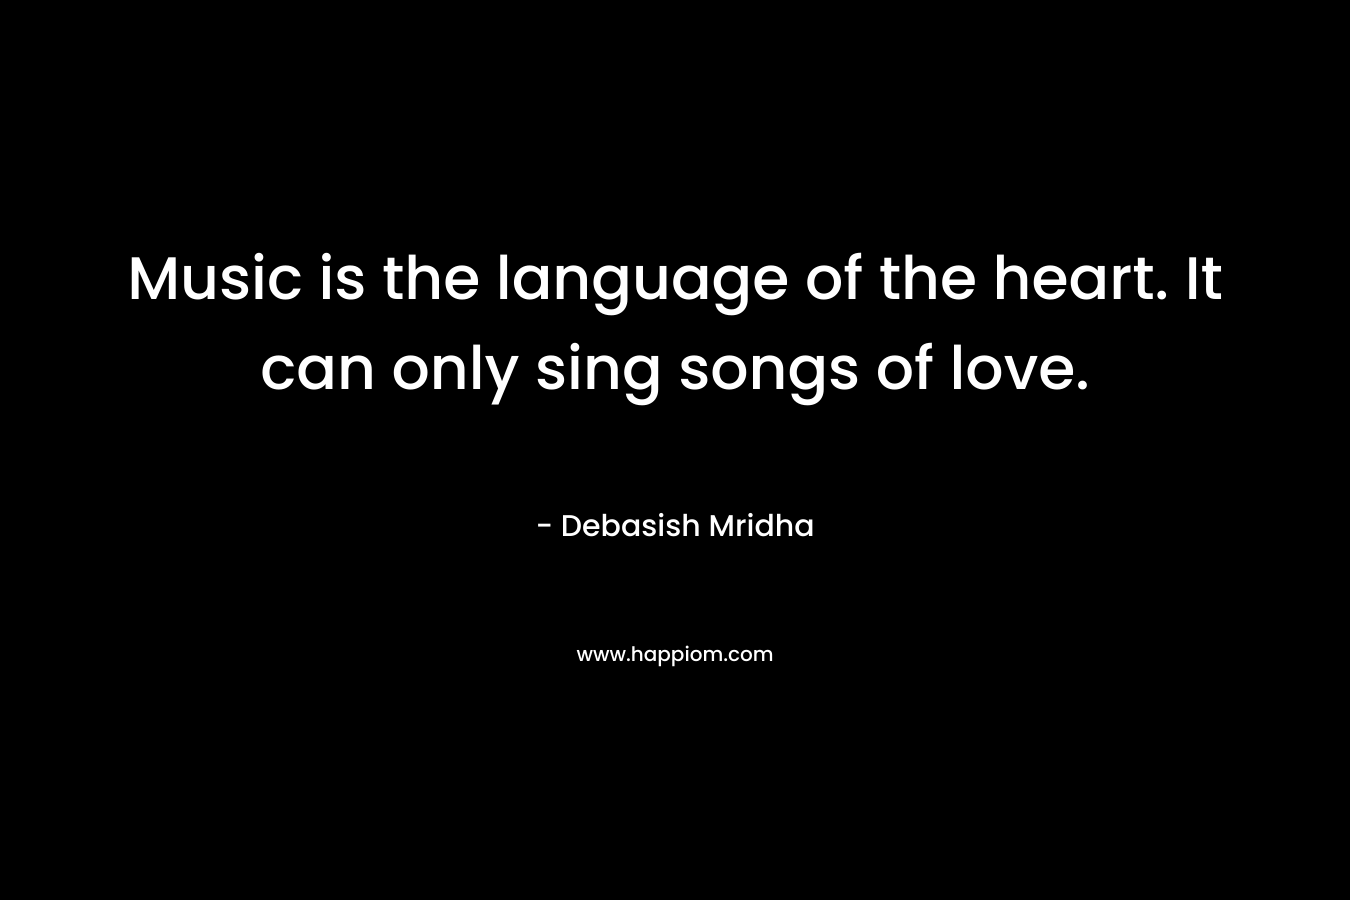 Music is the language of the heart. It can only sing songs of love.